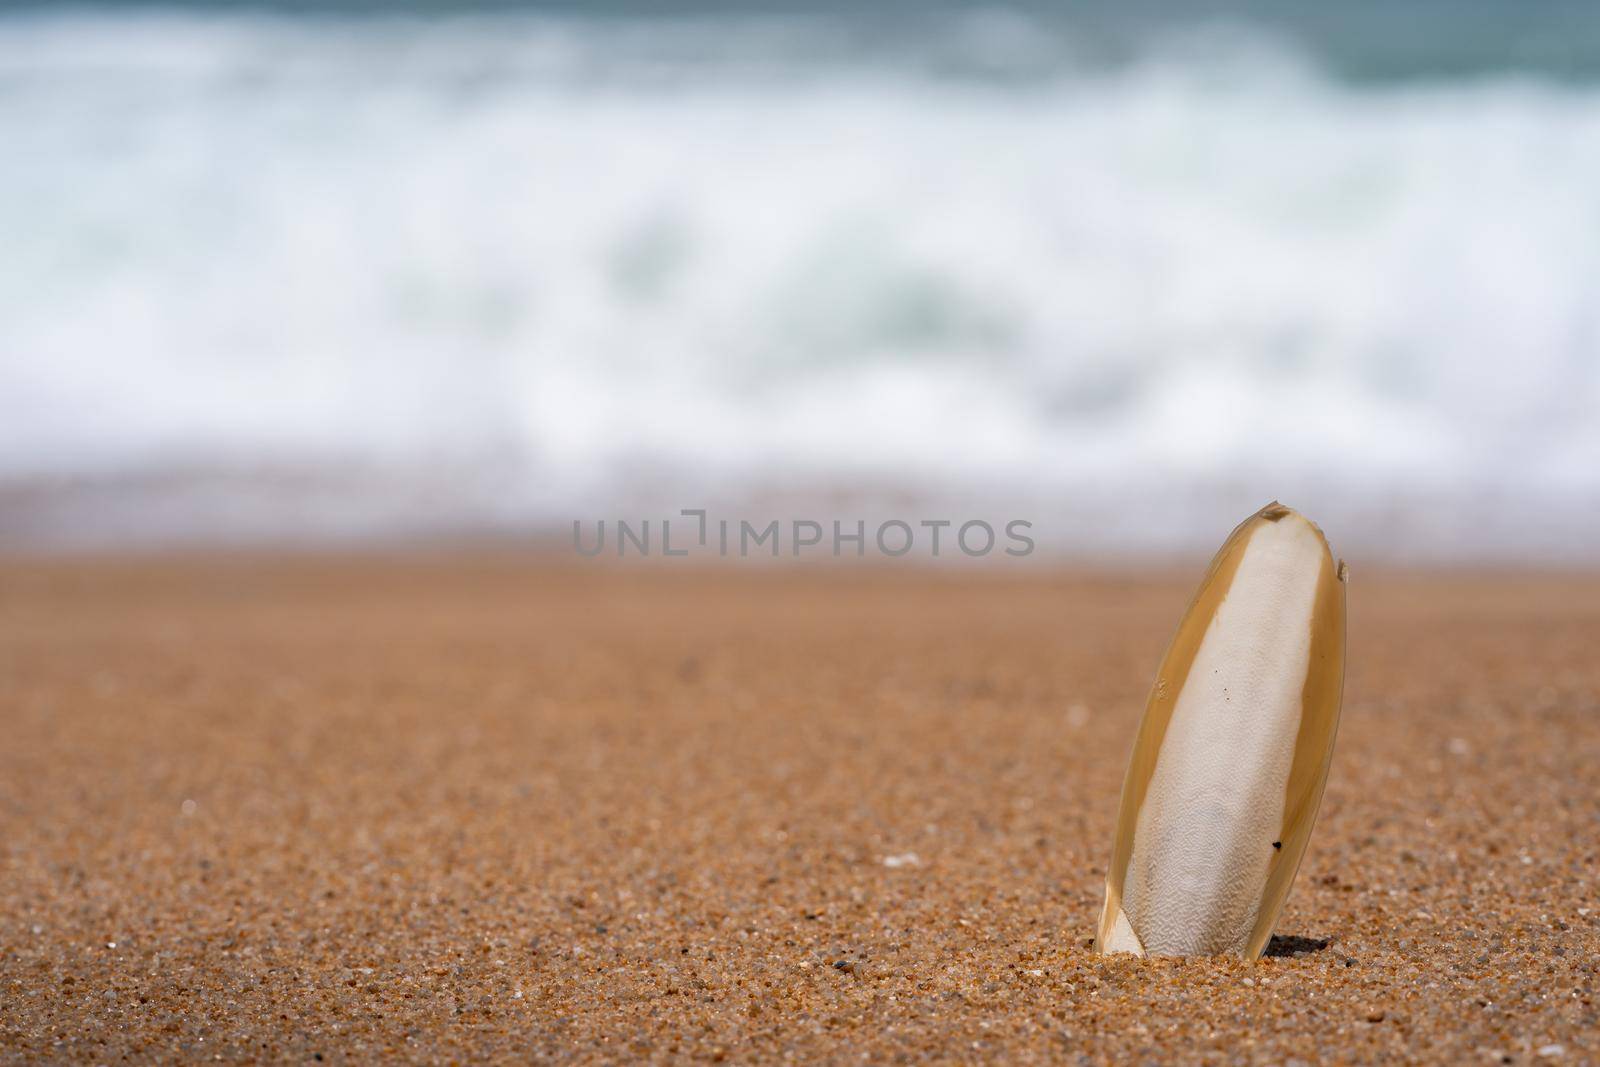 Cuttlefish bone wedged in the sand on the beach.